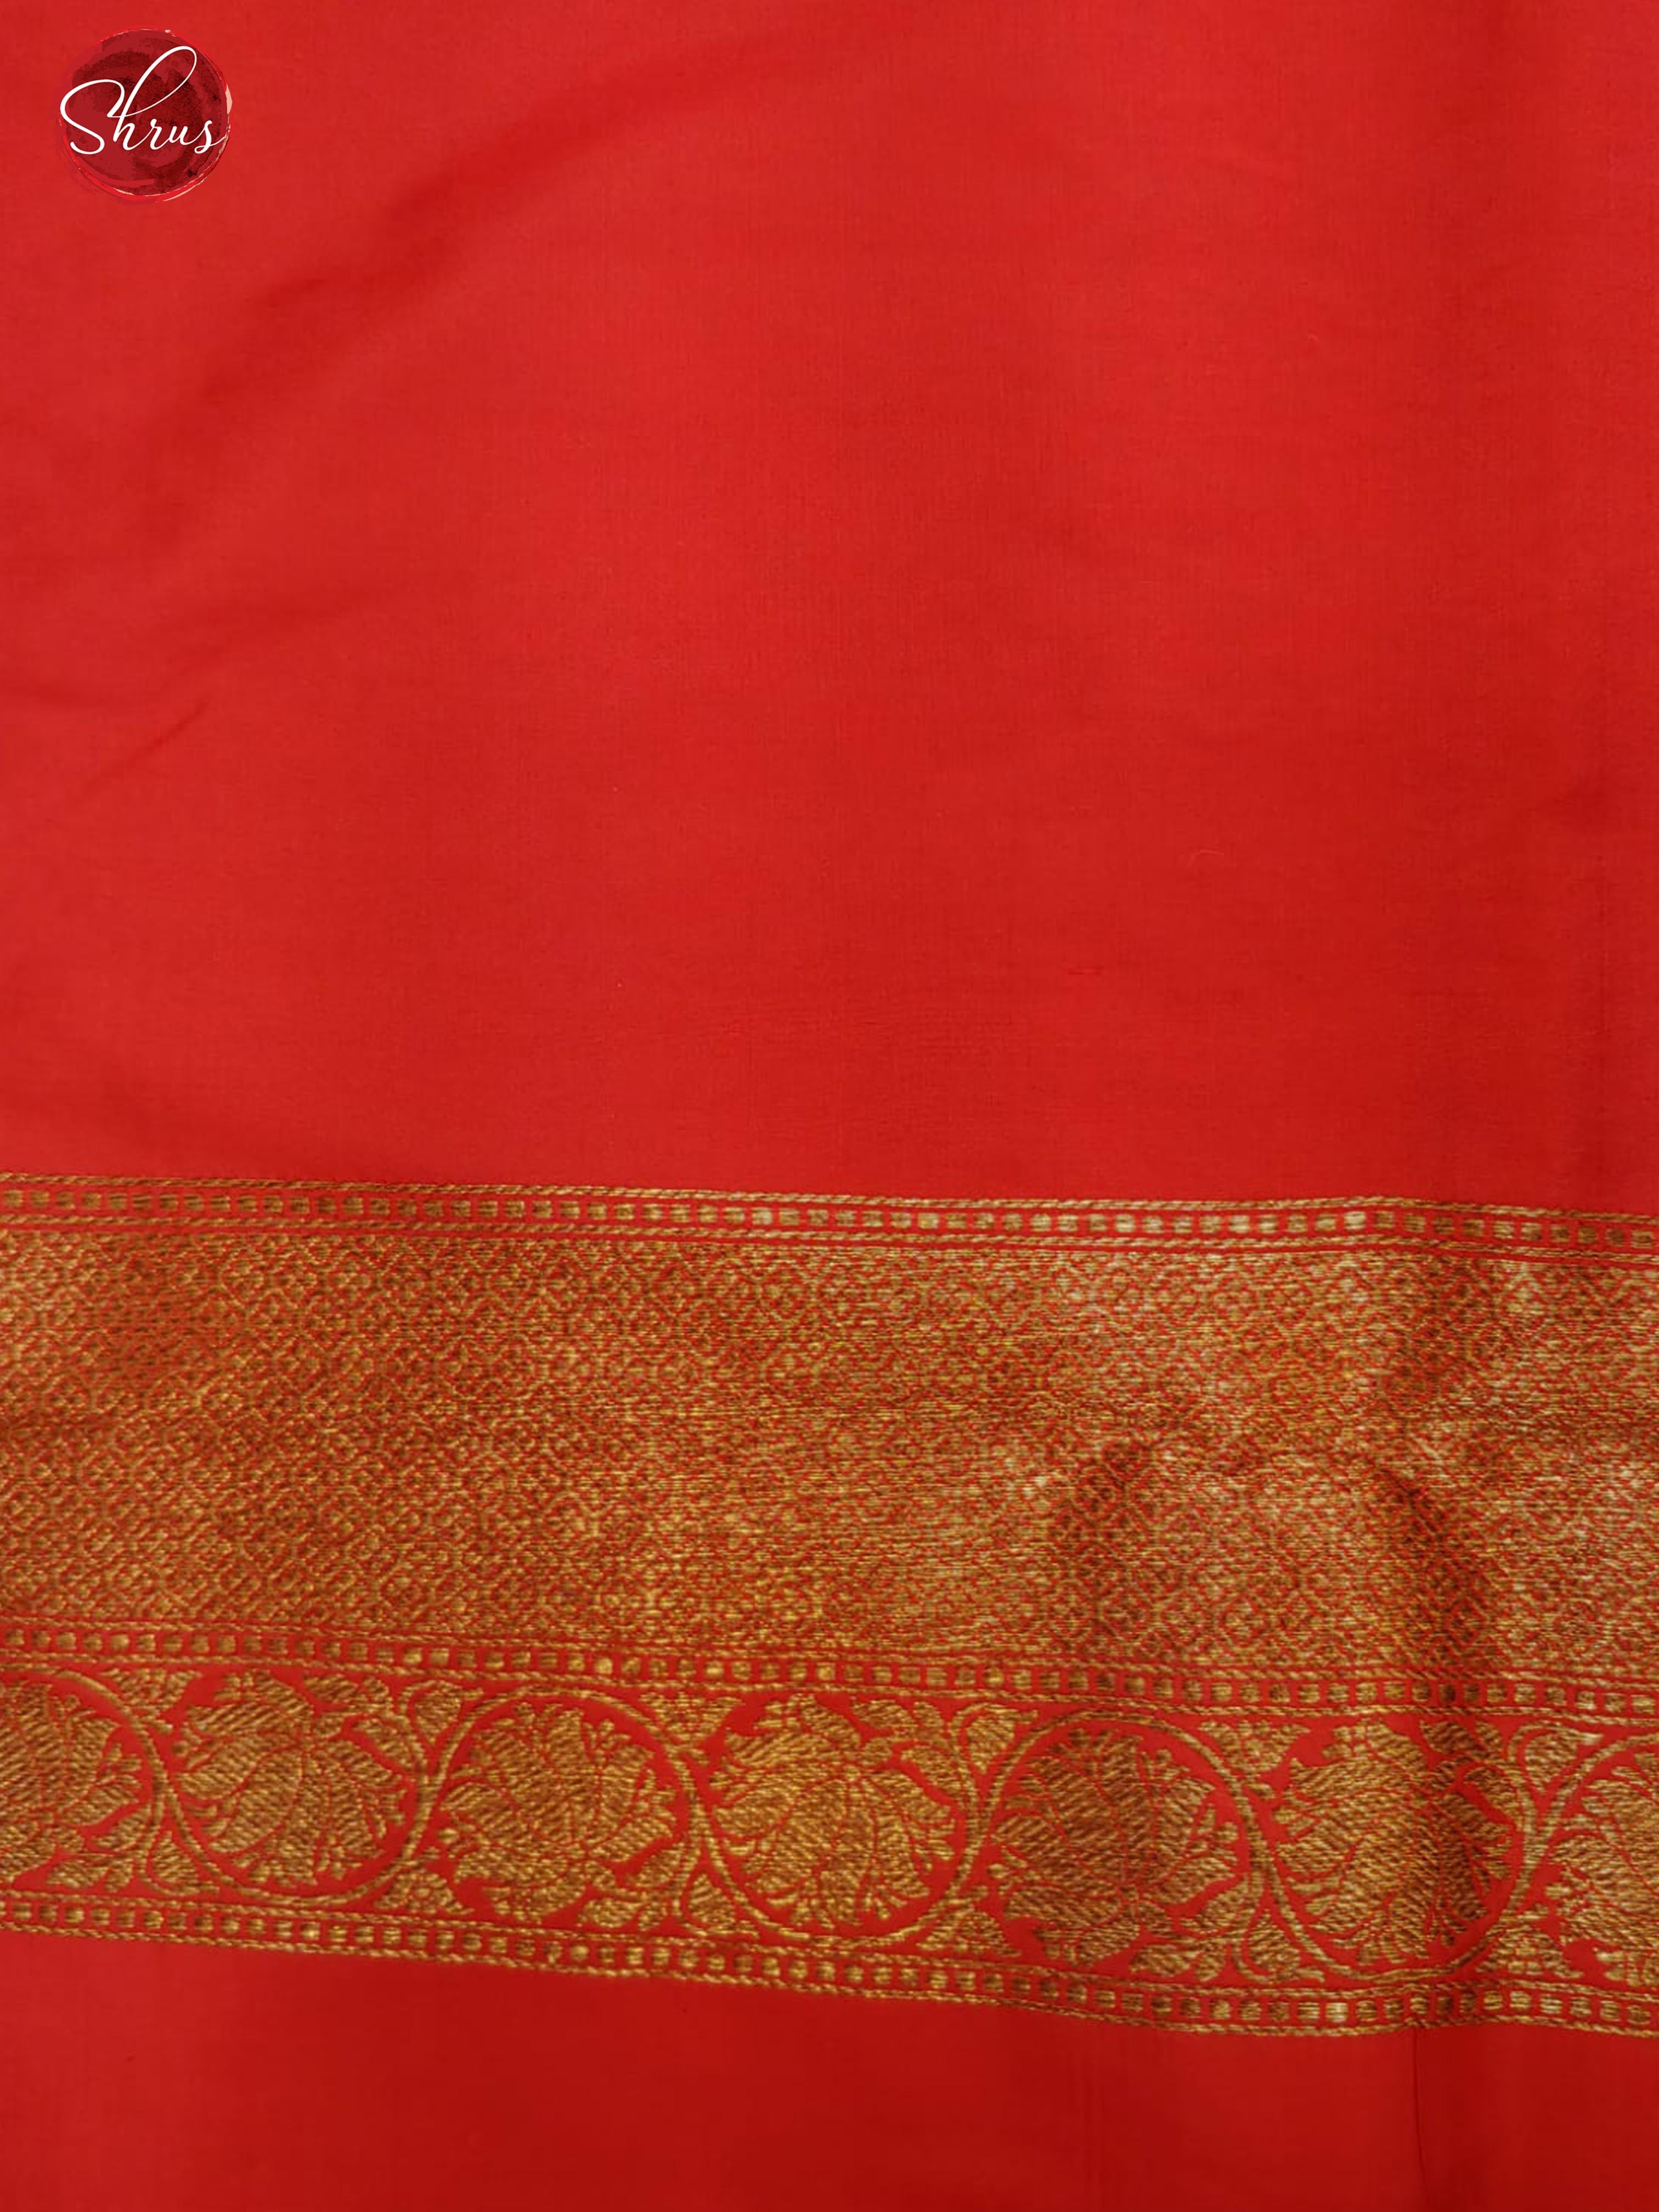 Pastel Green & Red- Dupion Silk with Zari woven floral motifs on the body & Contrast Gold Zari Border - Shop on ShrusEternity.com